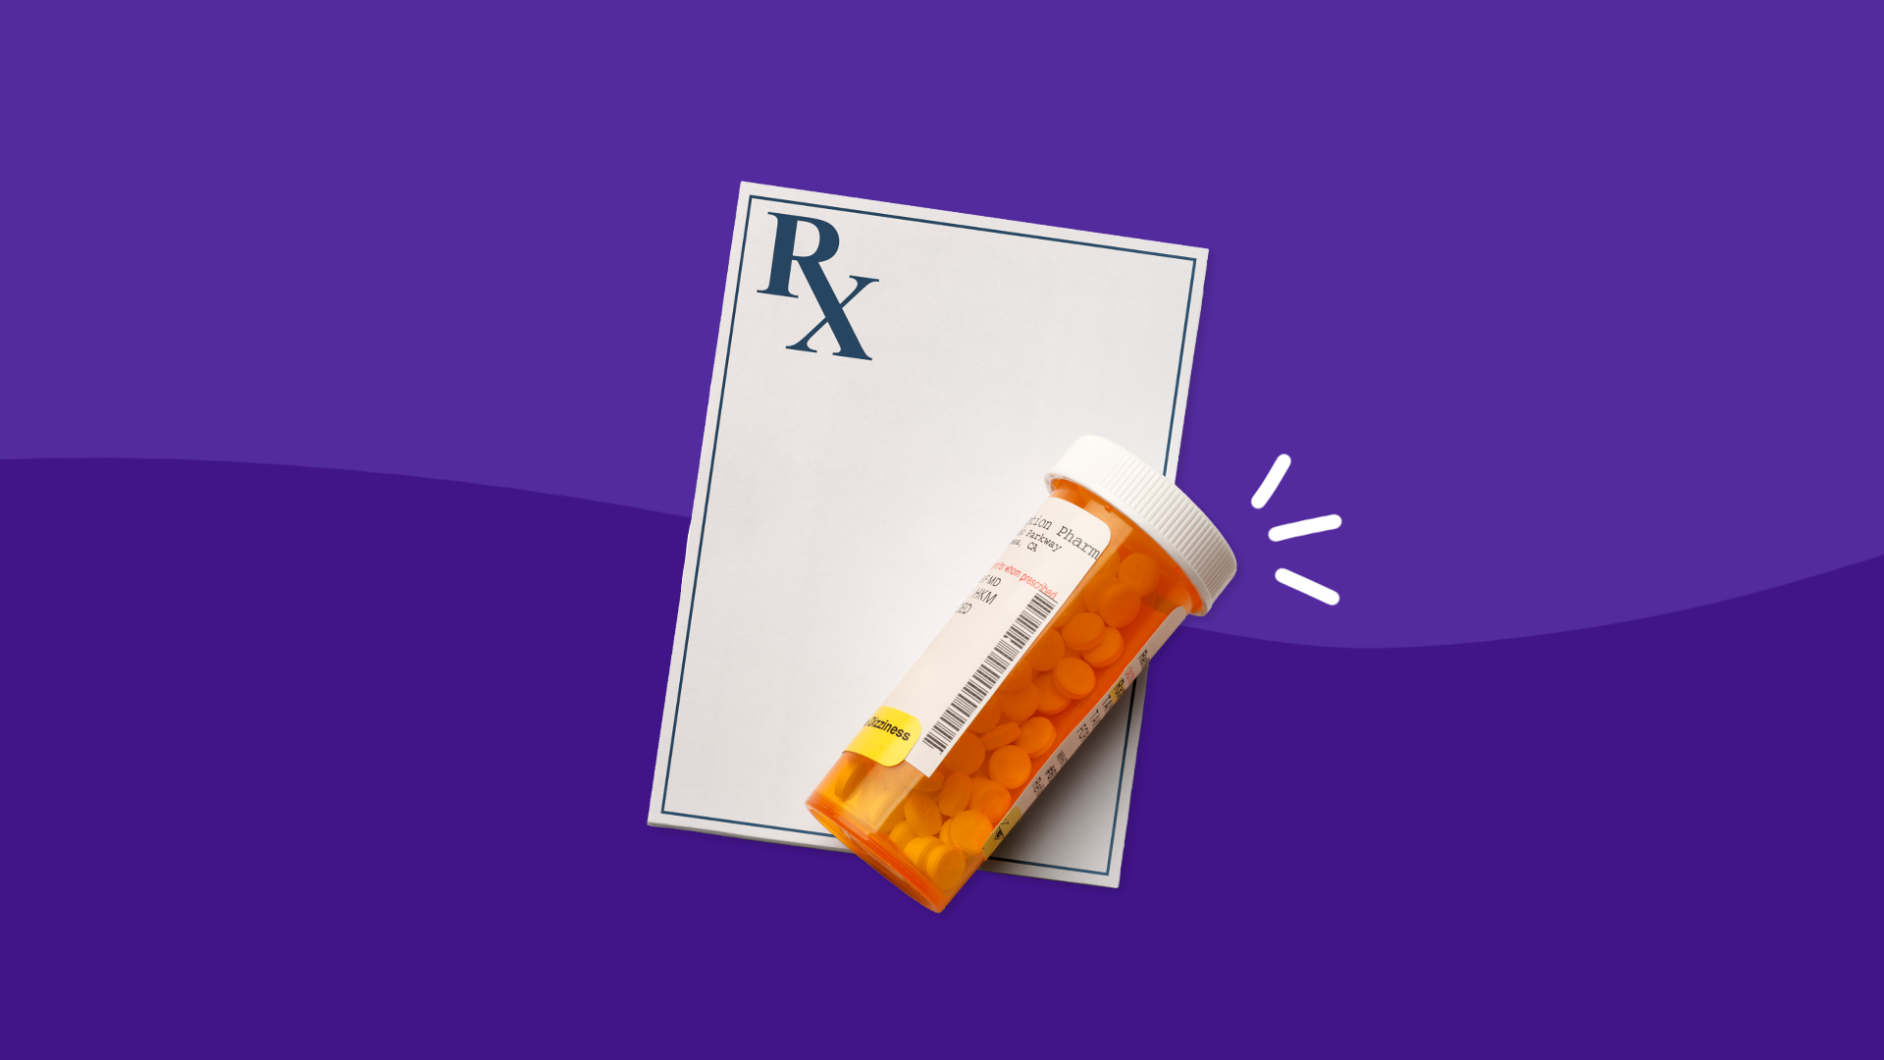 Prescription pad with pill bottle: Common side effects of Linzess and now to avoid them